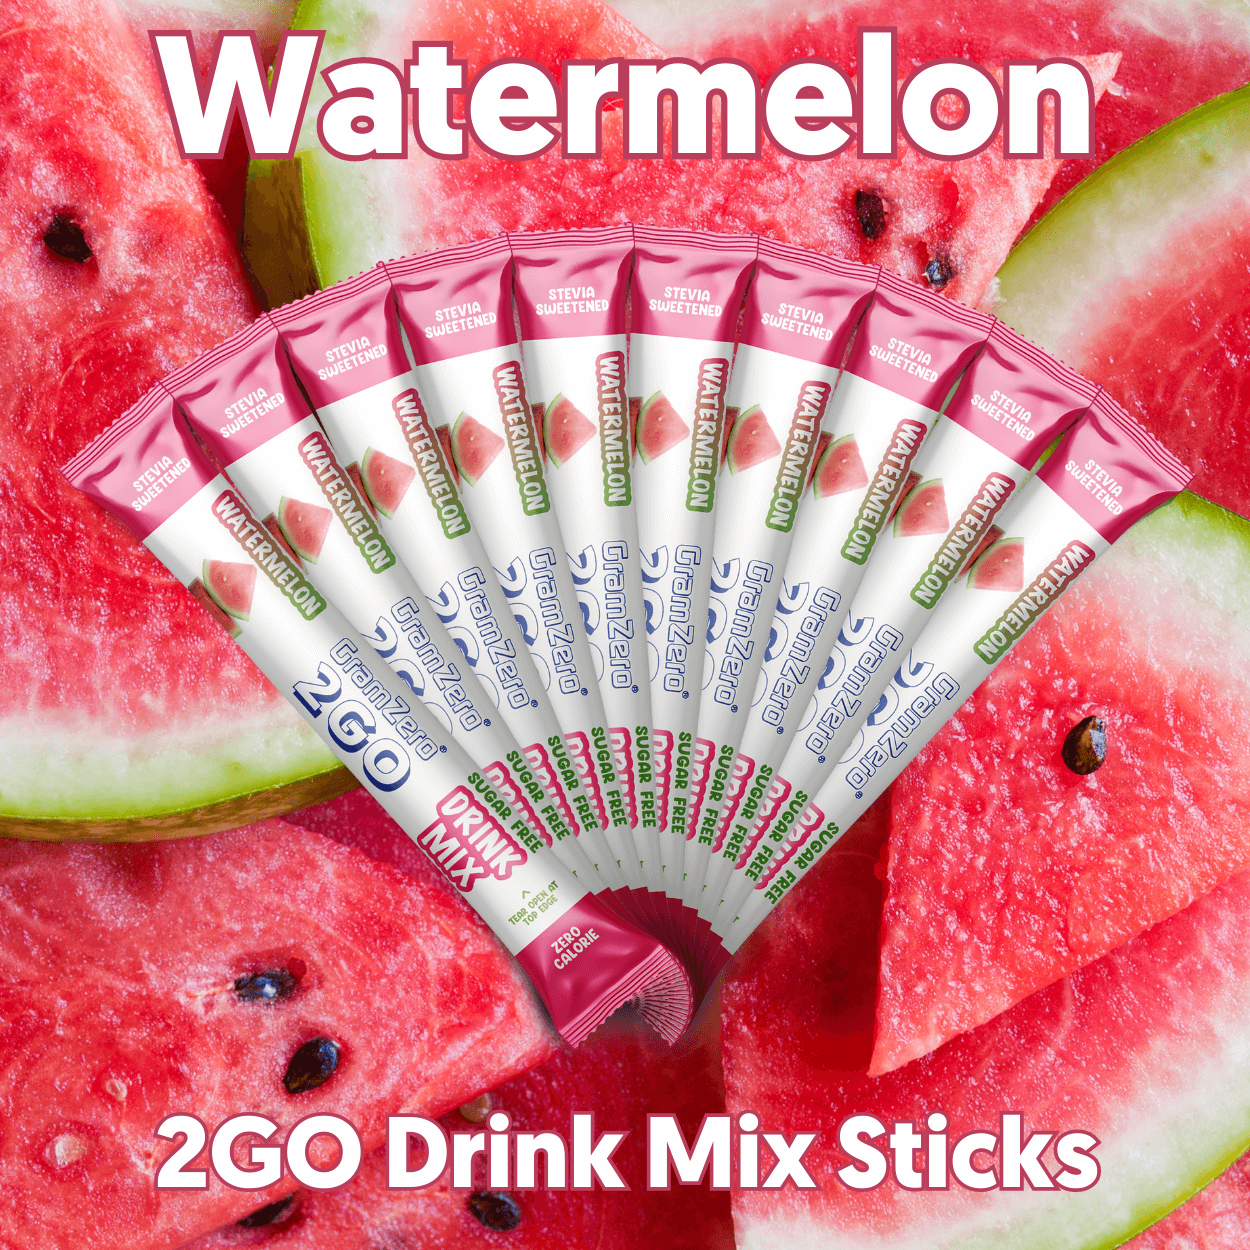 WATERMELON 2GO Sugar Free Drink Mix Sticks: 10 Pack ~ Great for Loaded Tea Kits